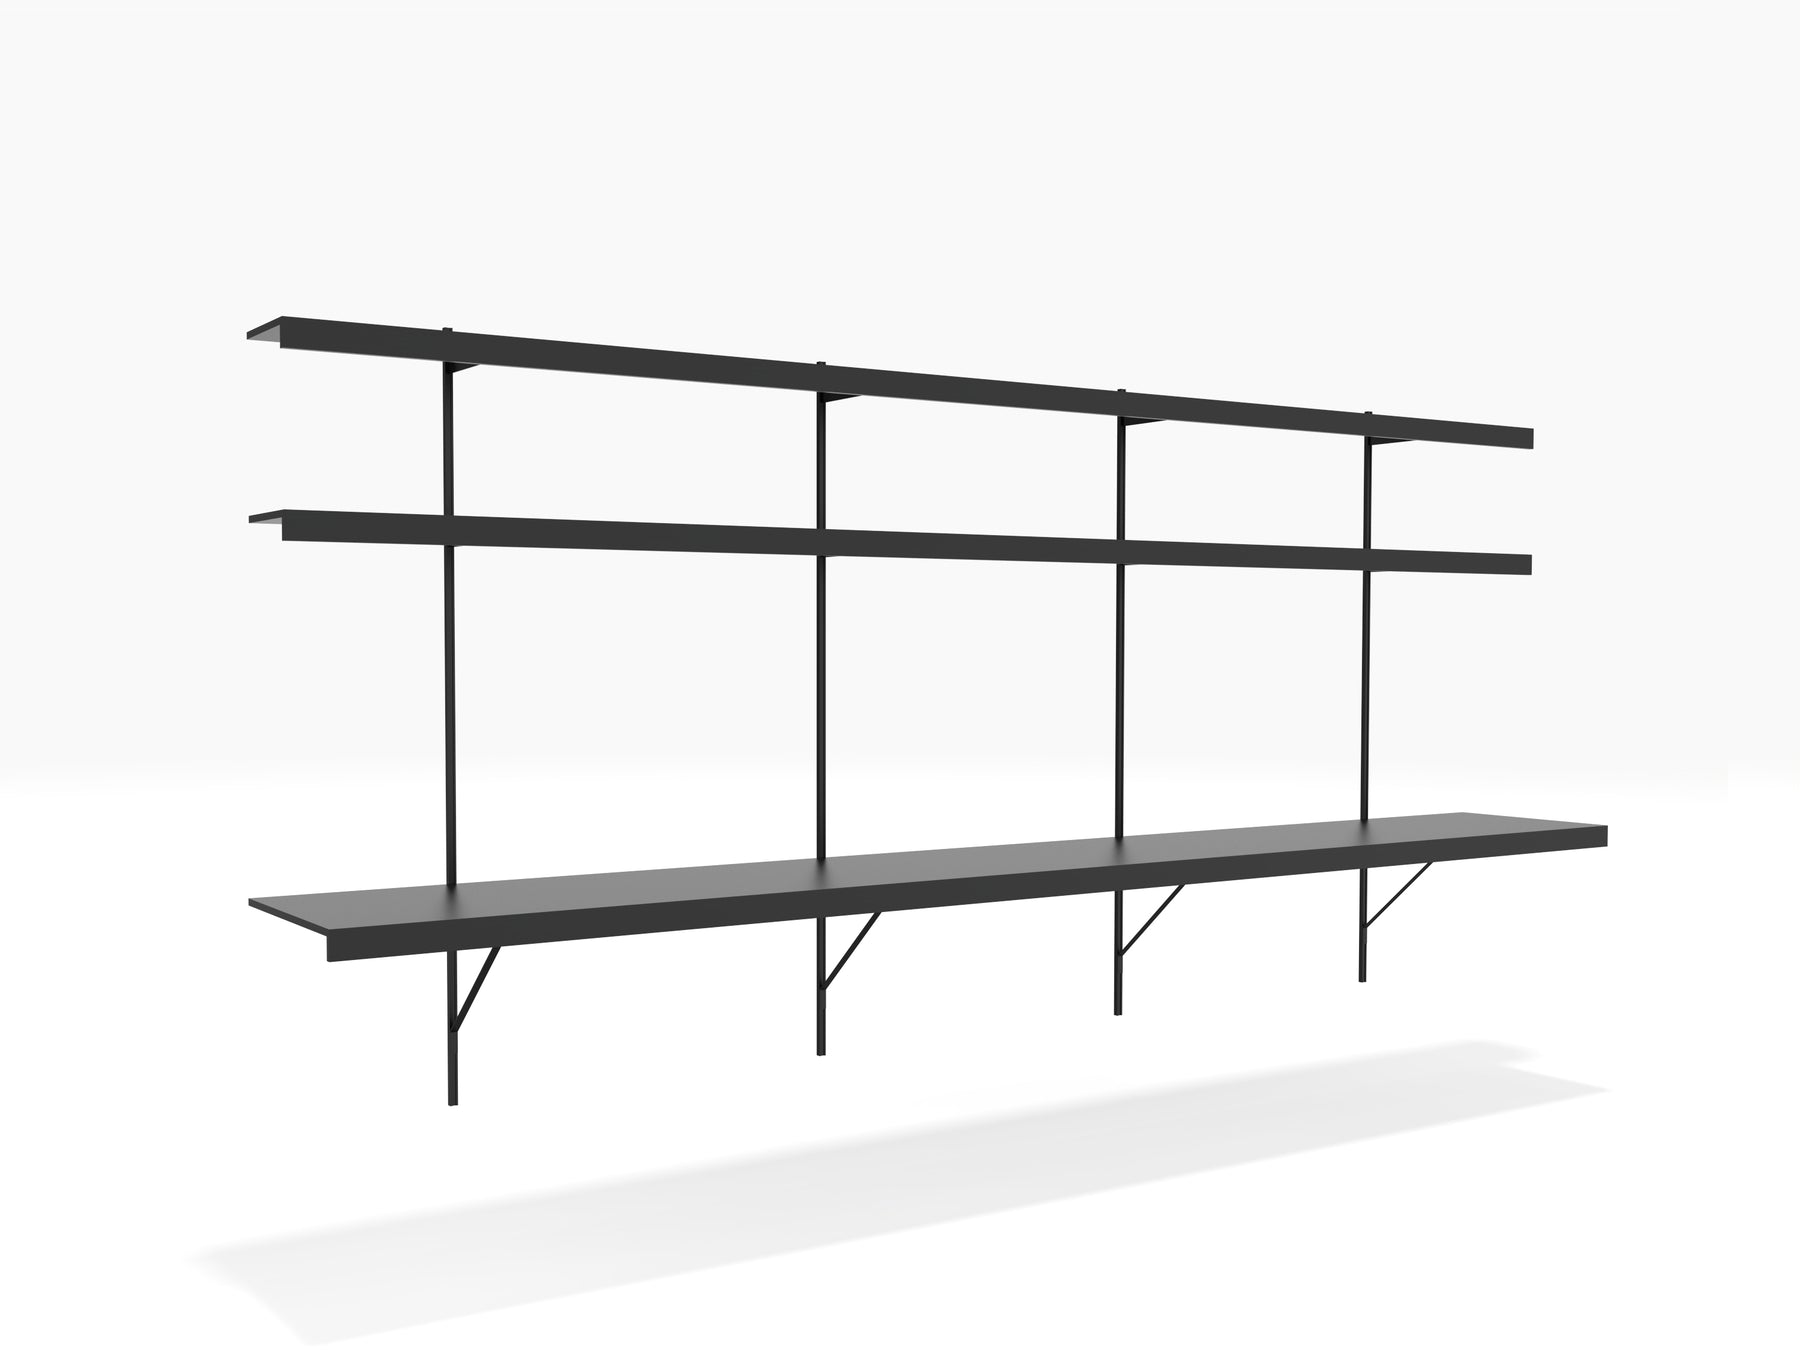 Floating wall desk for 3 users and adjustable wall shelves above in black